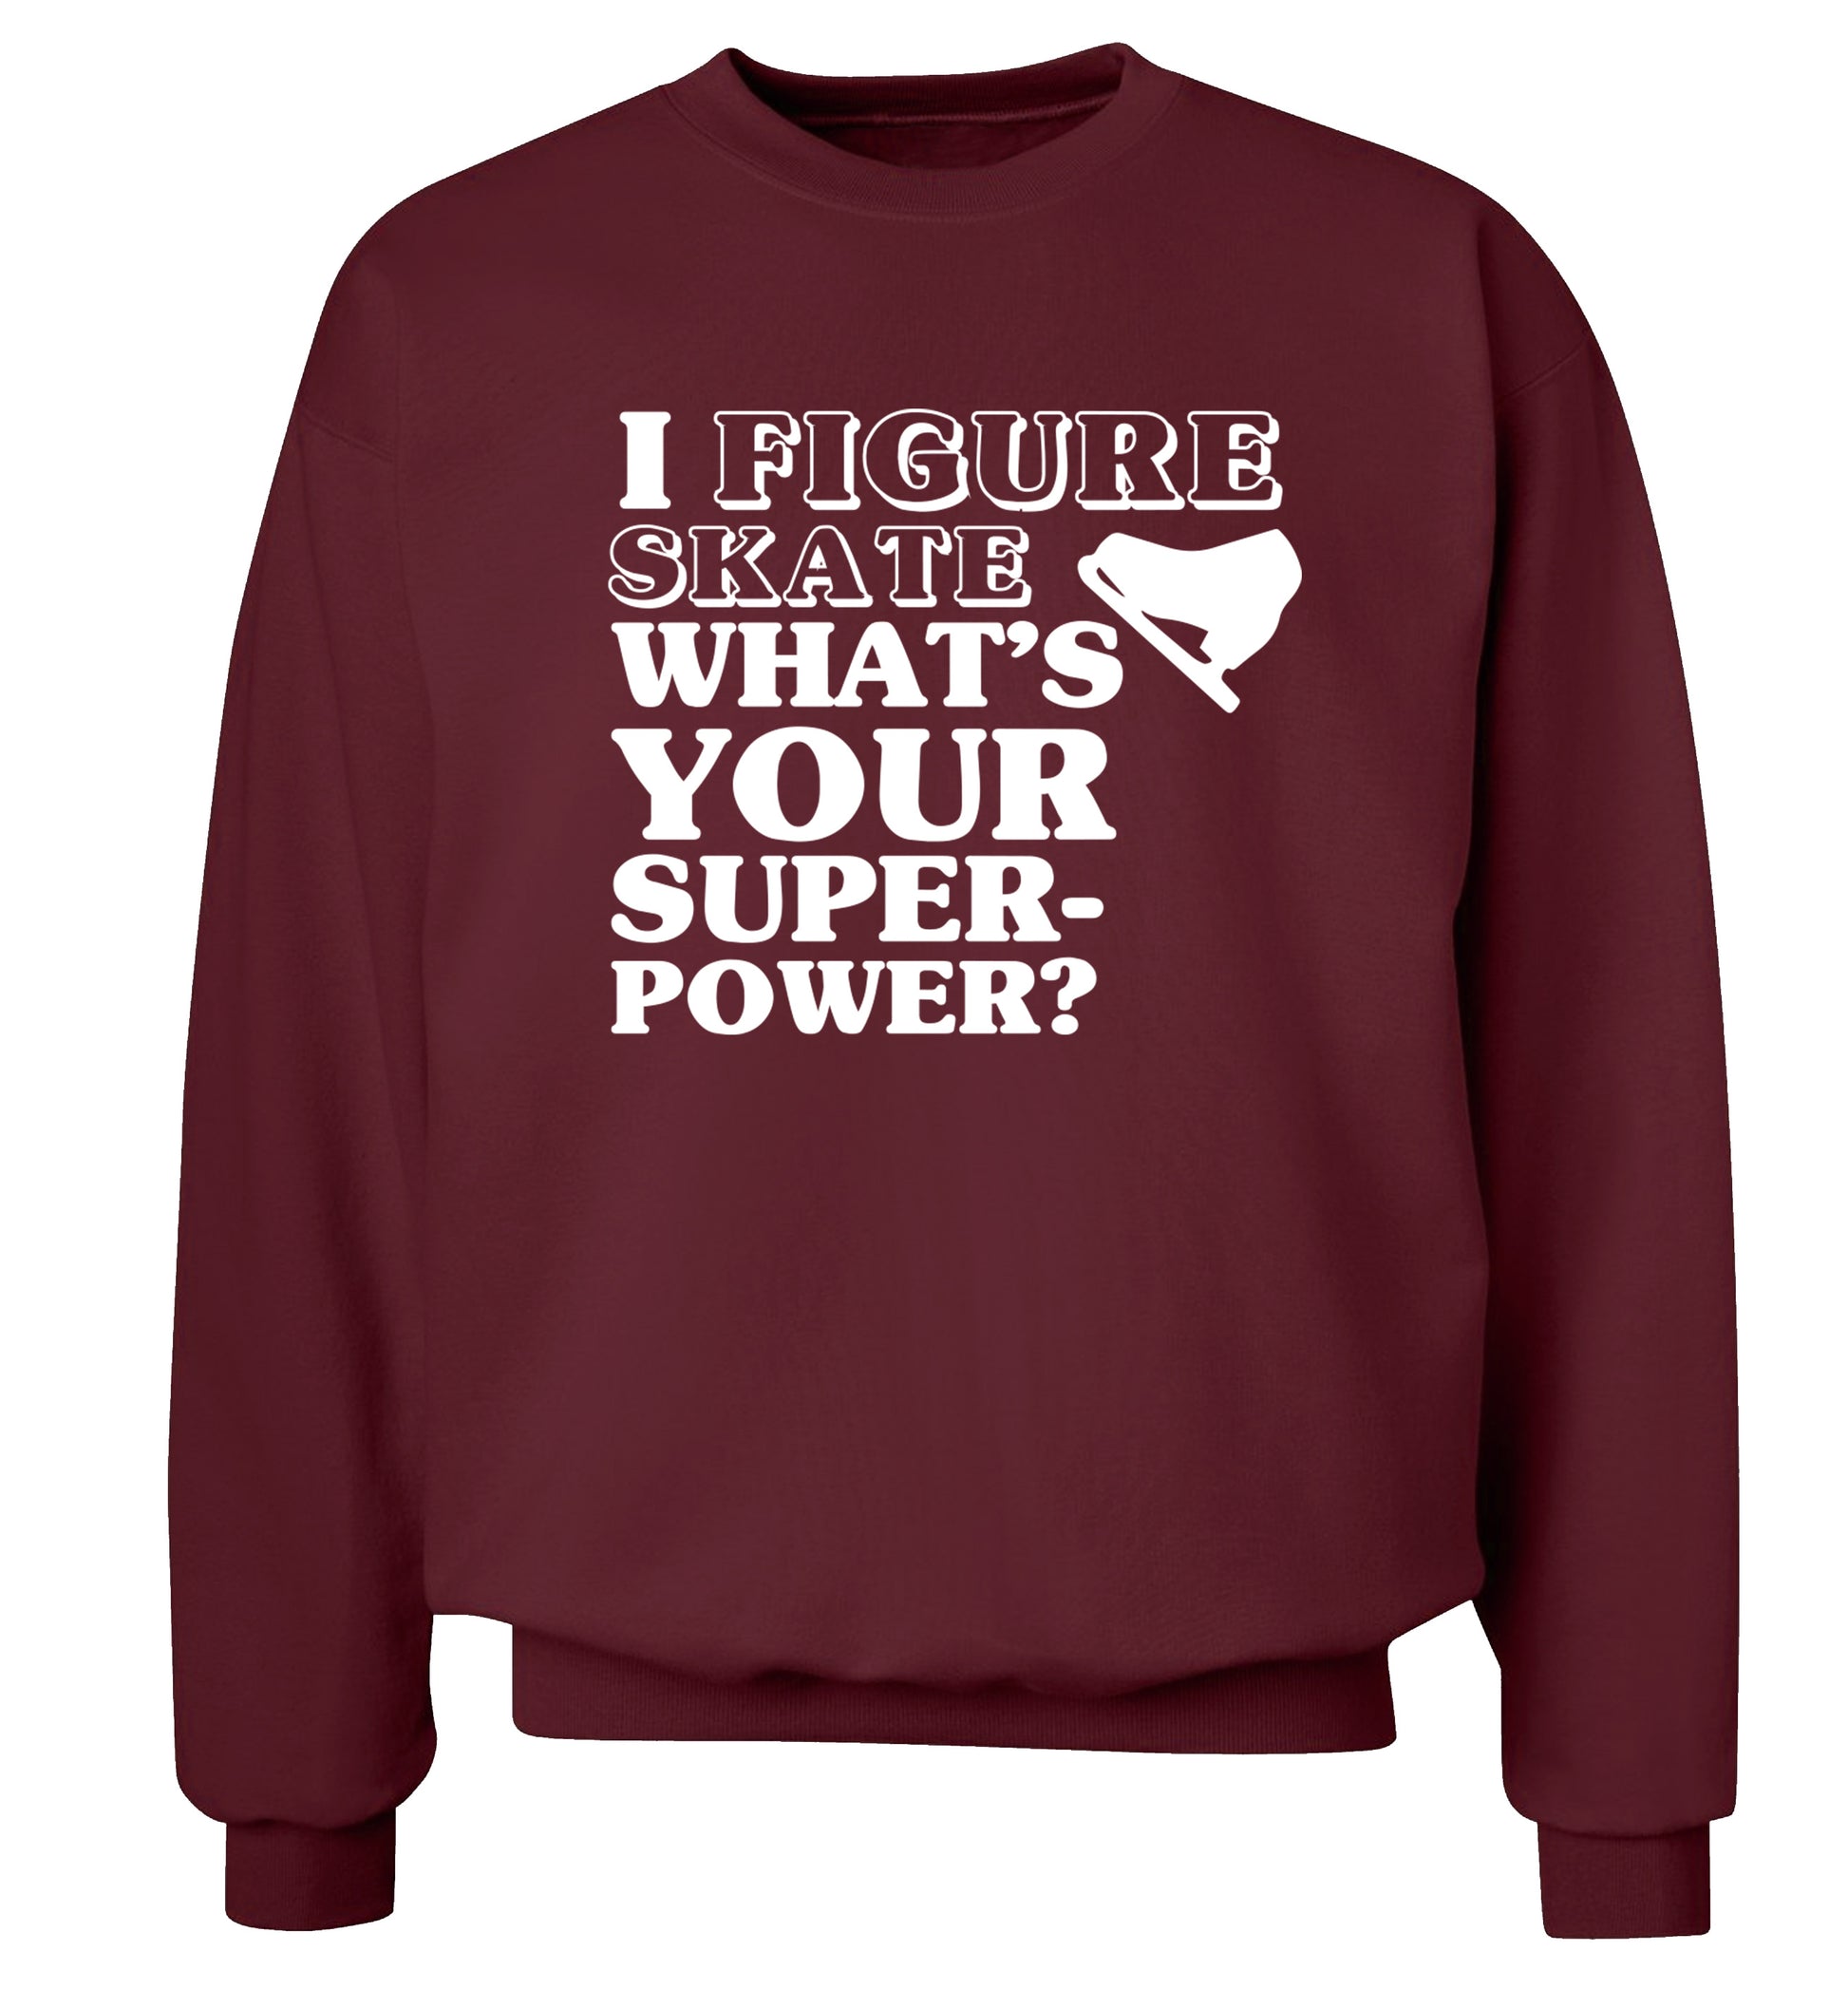 I figure skate what's your superpower? Adult's unisexmaroon Sweater 2XL